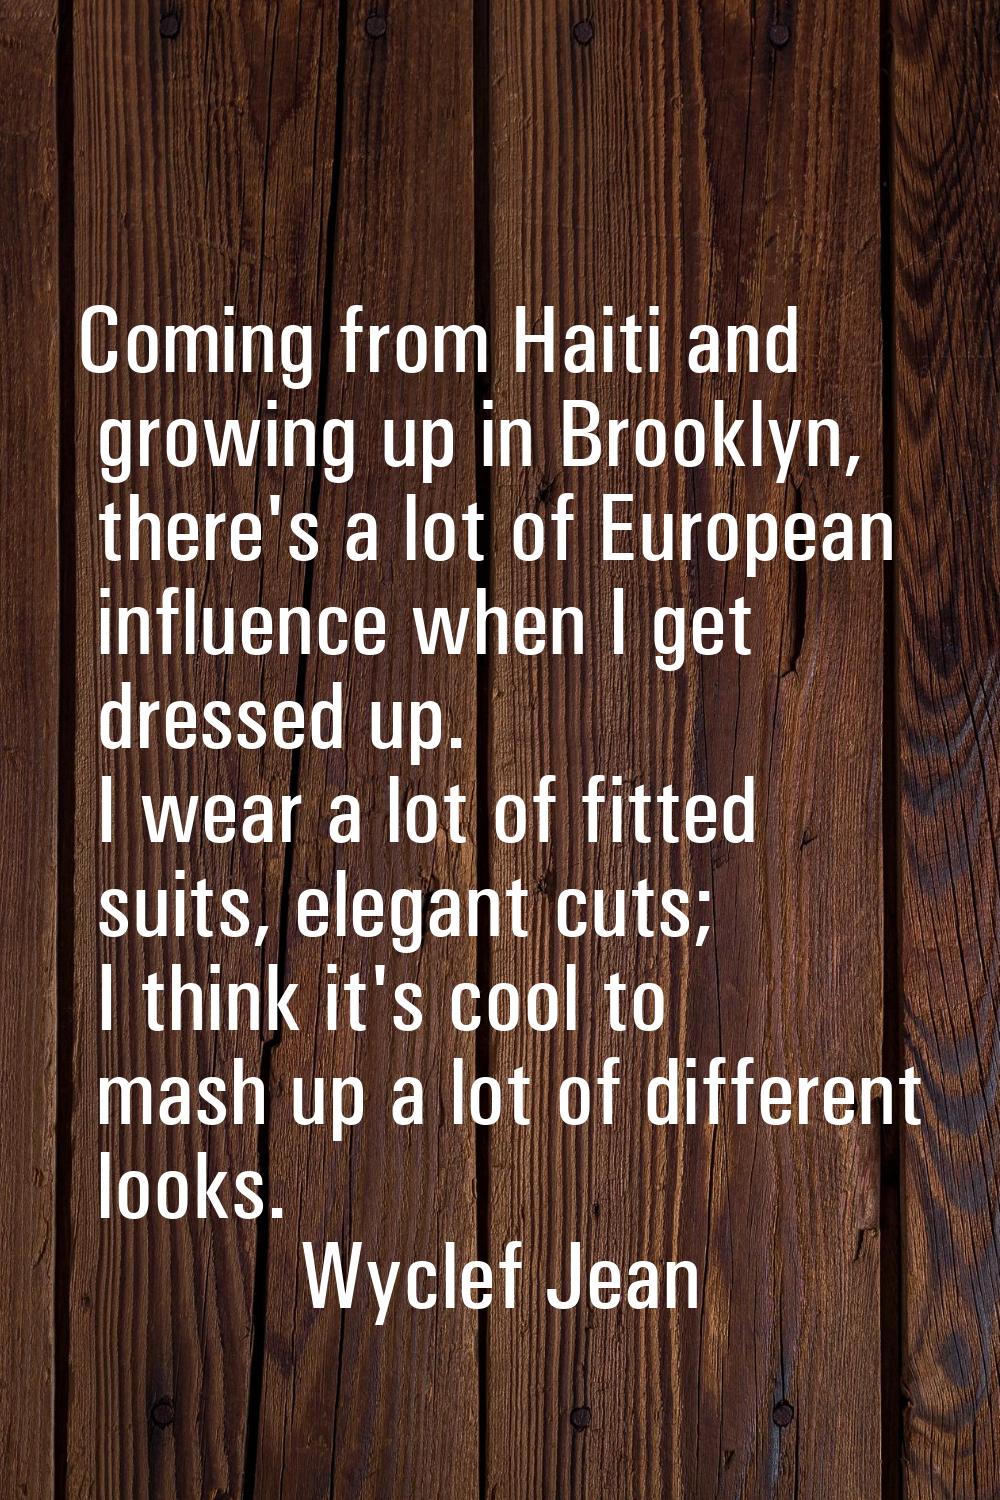 Coming from Haiti and growing up in Brooklyn, there's a lot of European influence when I get dresse